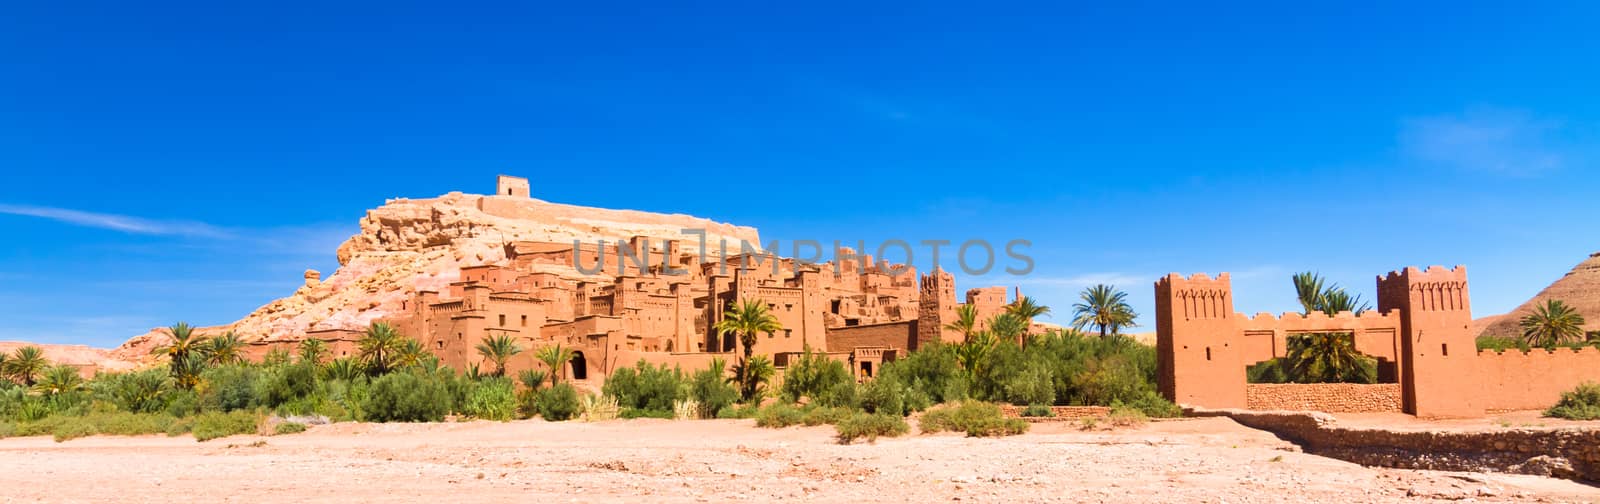 Ancient city of Ait Benhaddou in Morocco by kasto